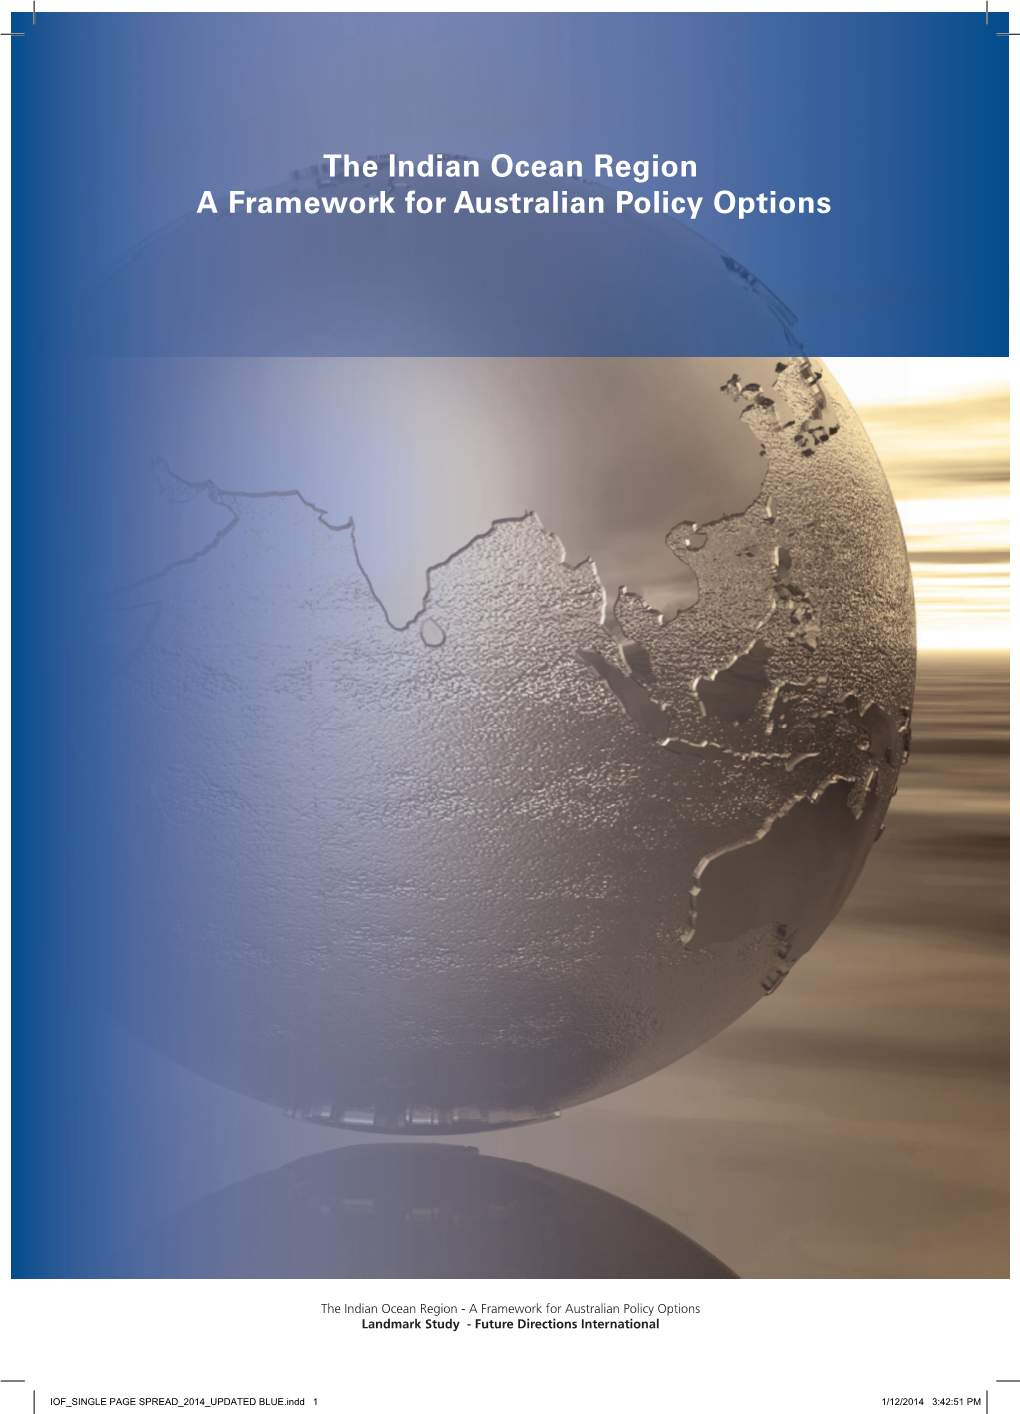 The Indian Ocean Region a Framework for Australian Policy Options